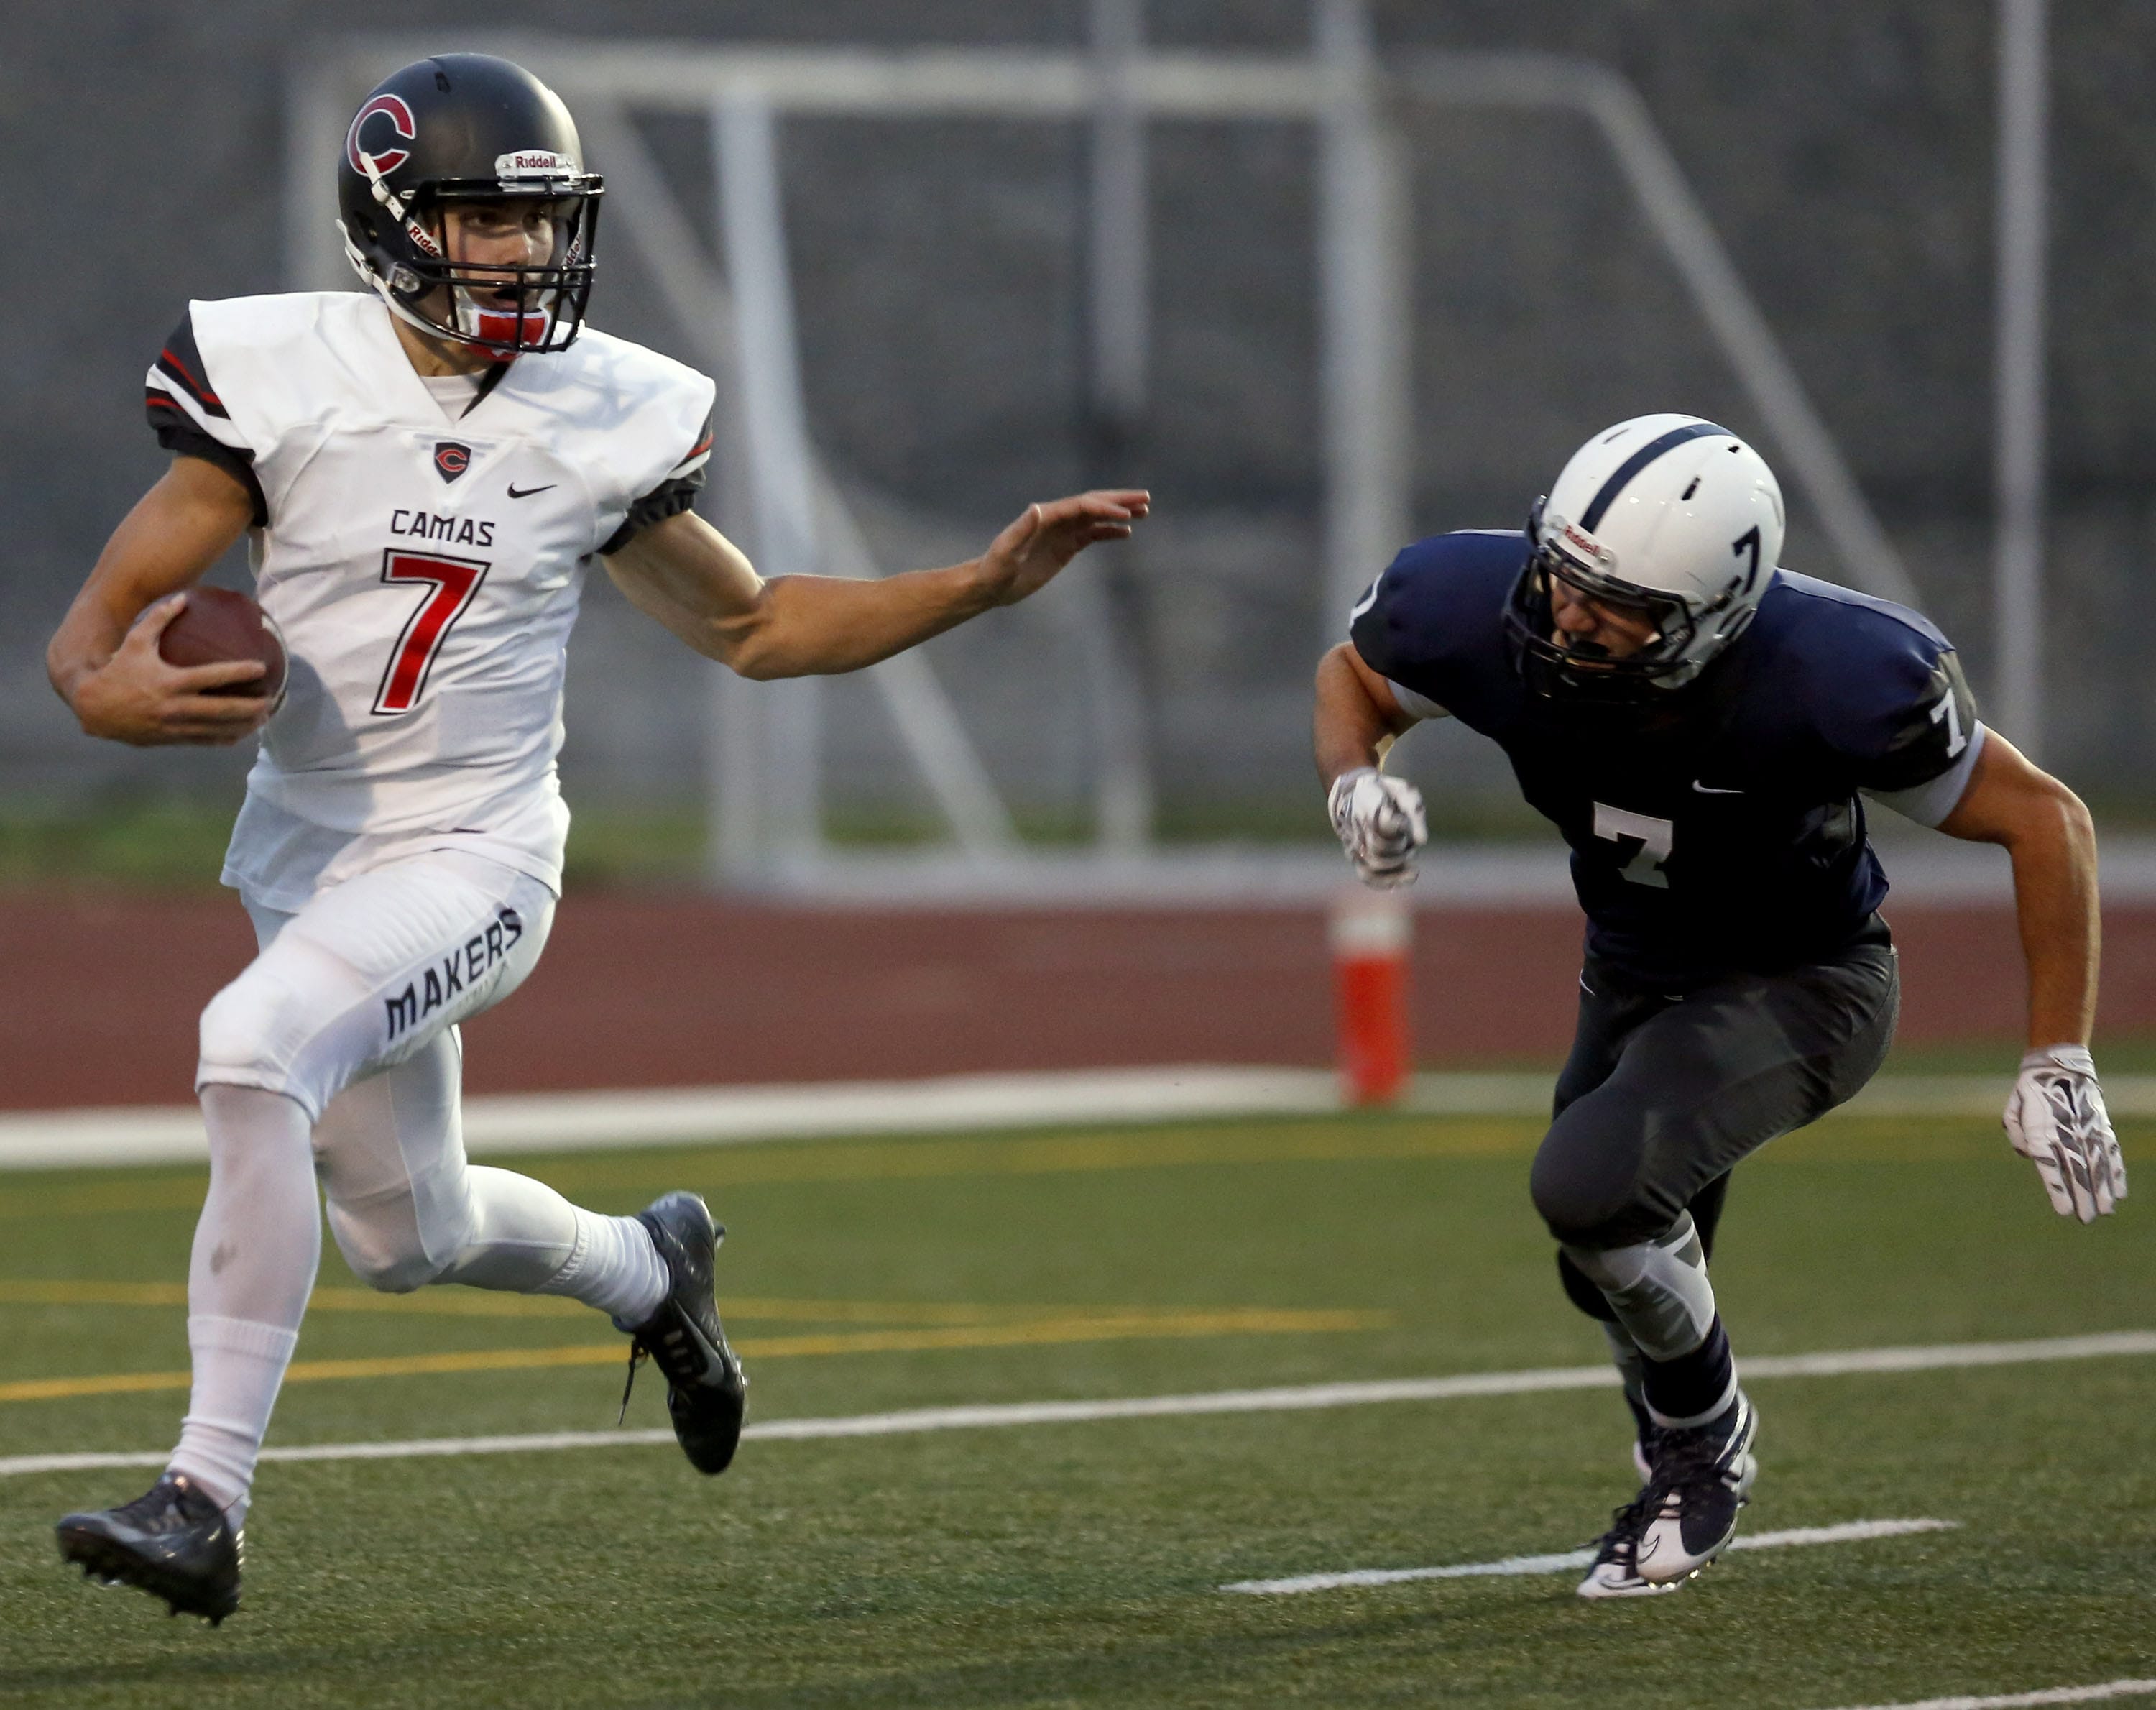 Camas High School's Liam Fitzgerald, left, moves past a tackle attempt from Chiawana High School's Josh Wilson during a Sept.